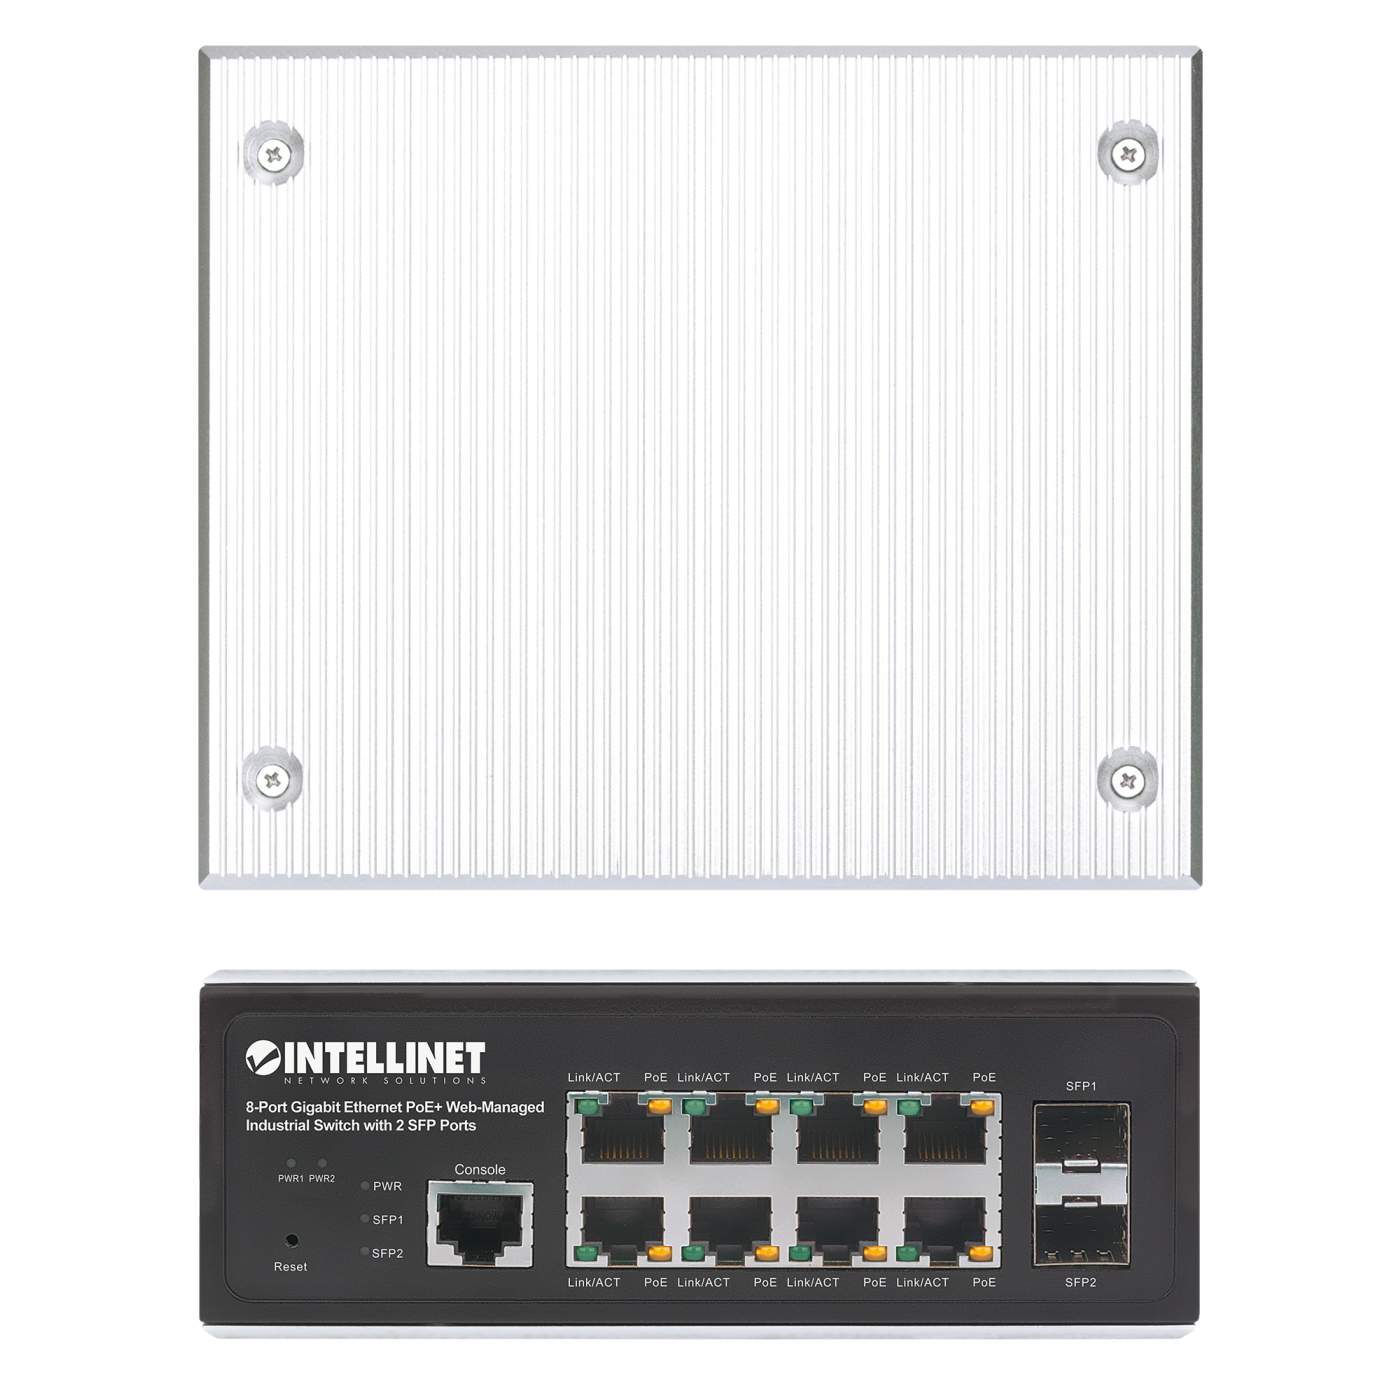 Industrial 8 Port Gigabit PoE Switch - 4 x PoE+ 30W - Power Over Ethernet -  Hardened GbE Layer/L2 Managed Switch - Rugged High Power Gigabit Network